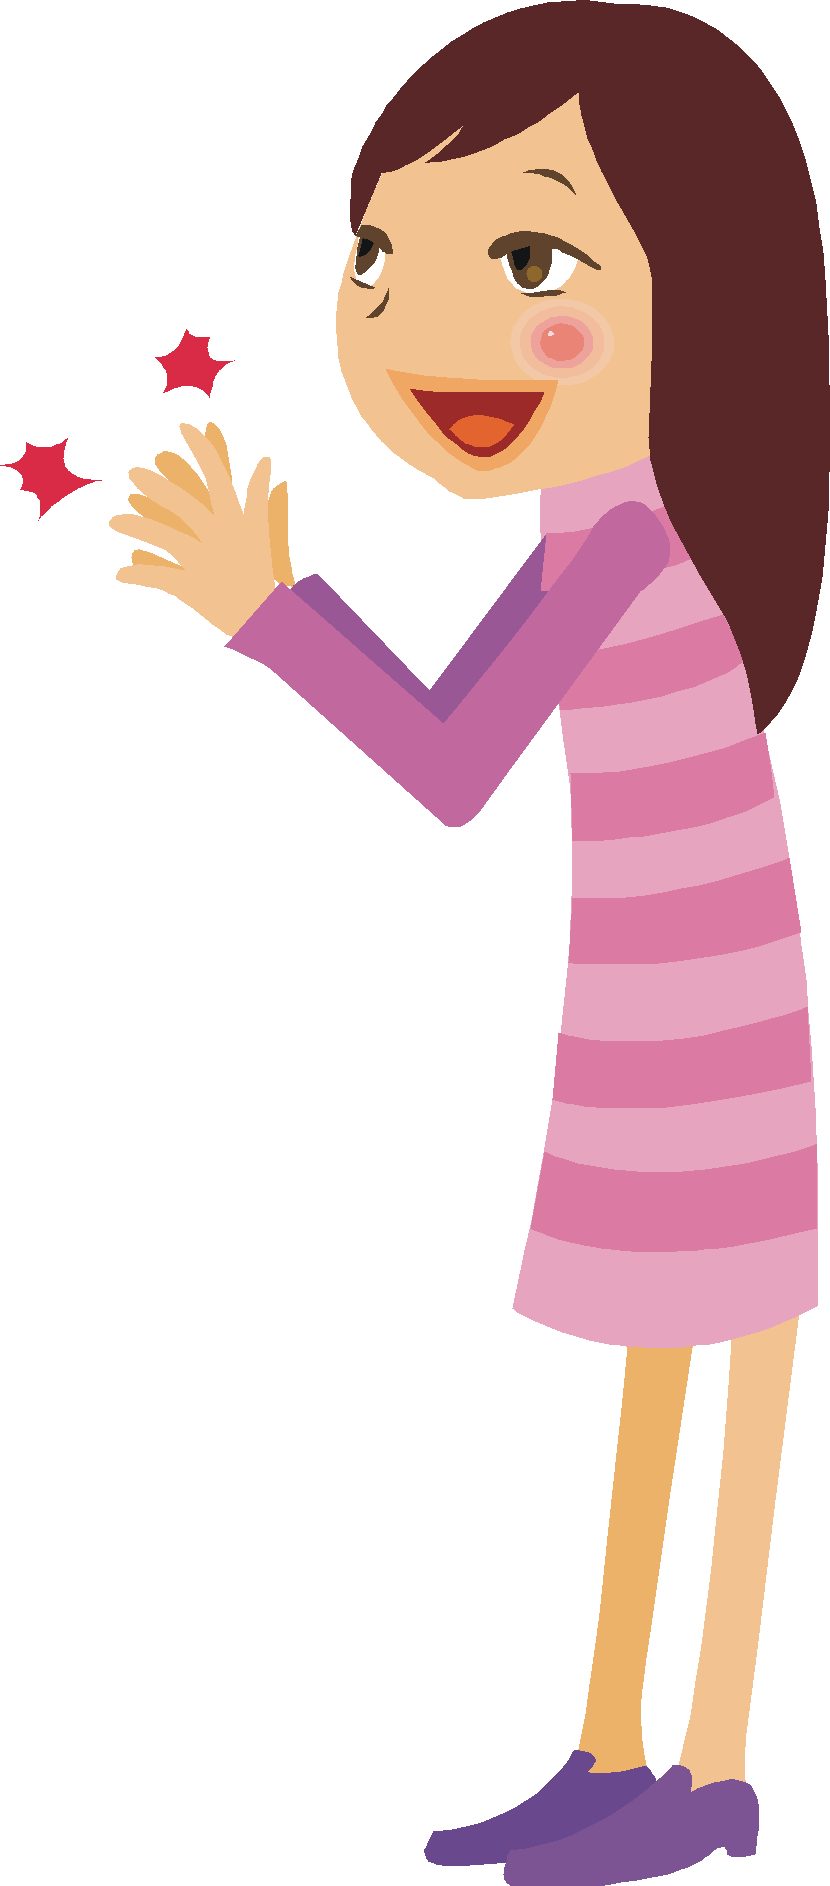 Hand clipart children's. Start the week with